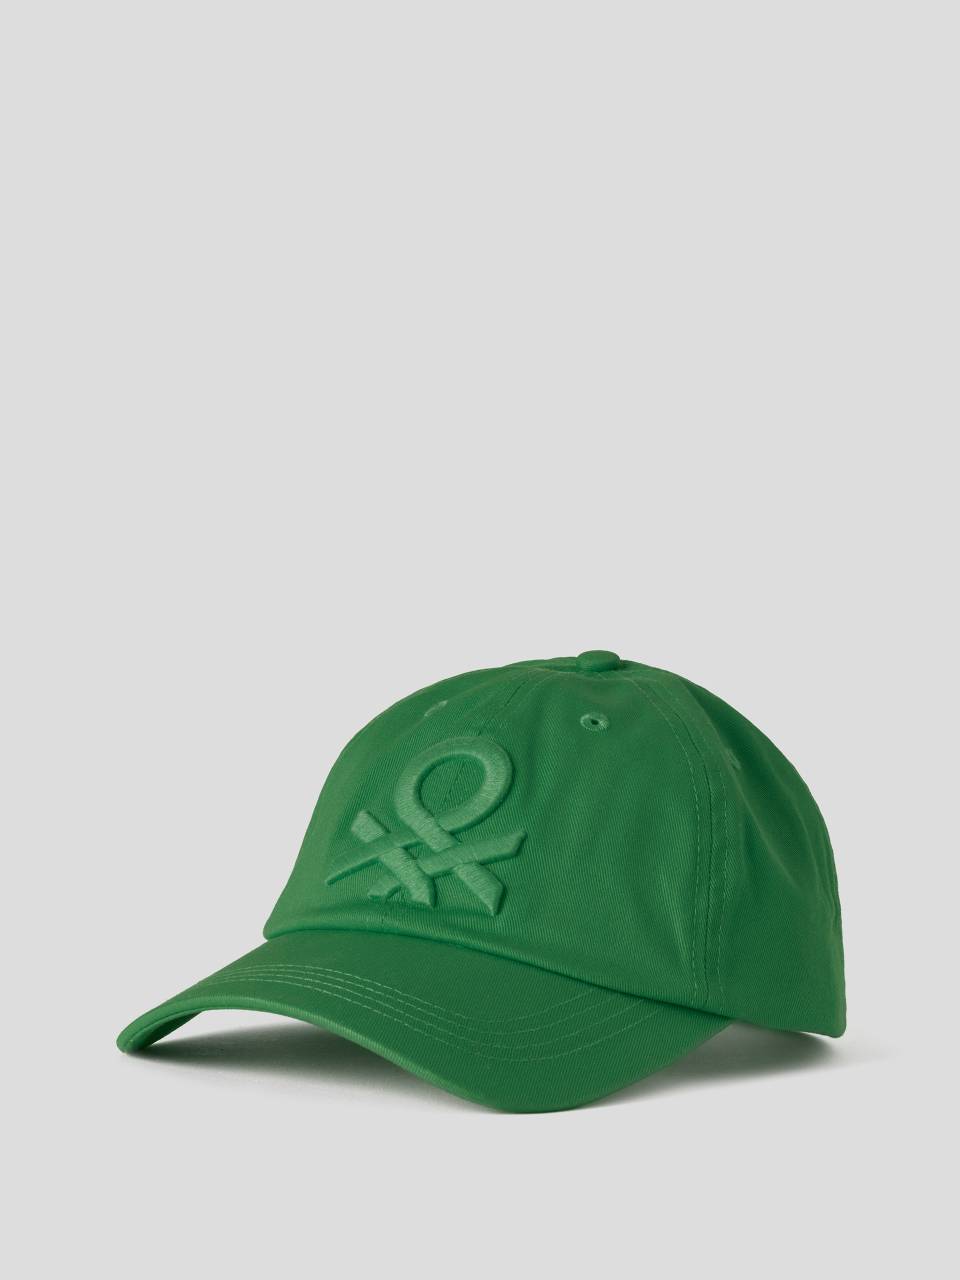 Benetton Green cap with embroidered logo. 1